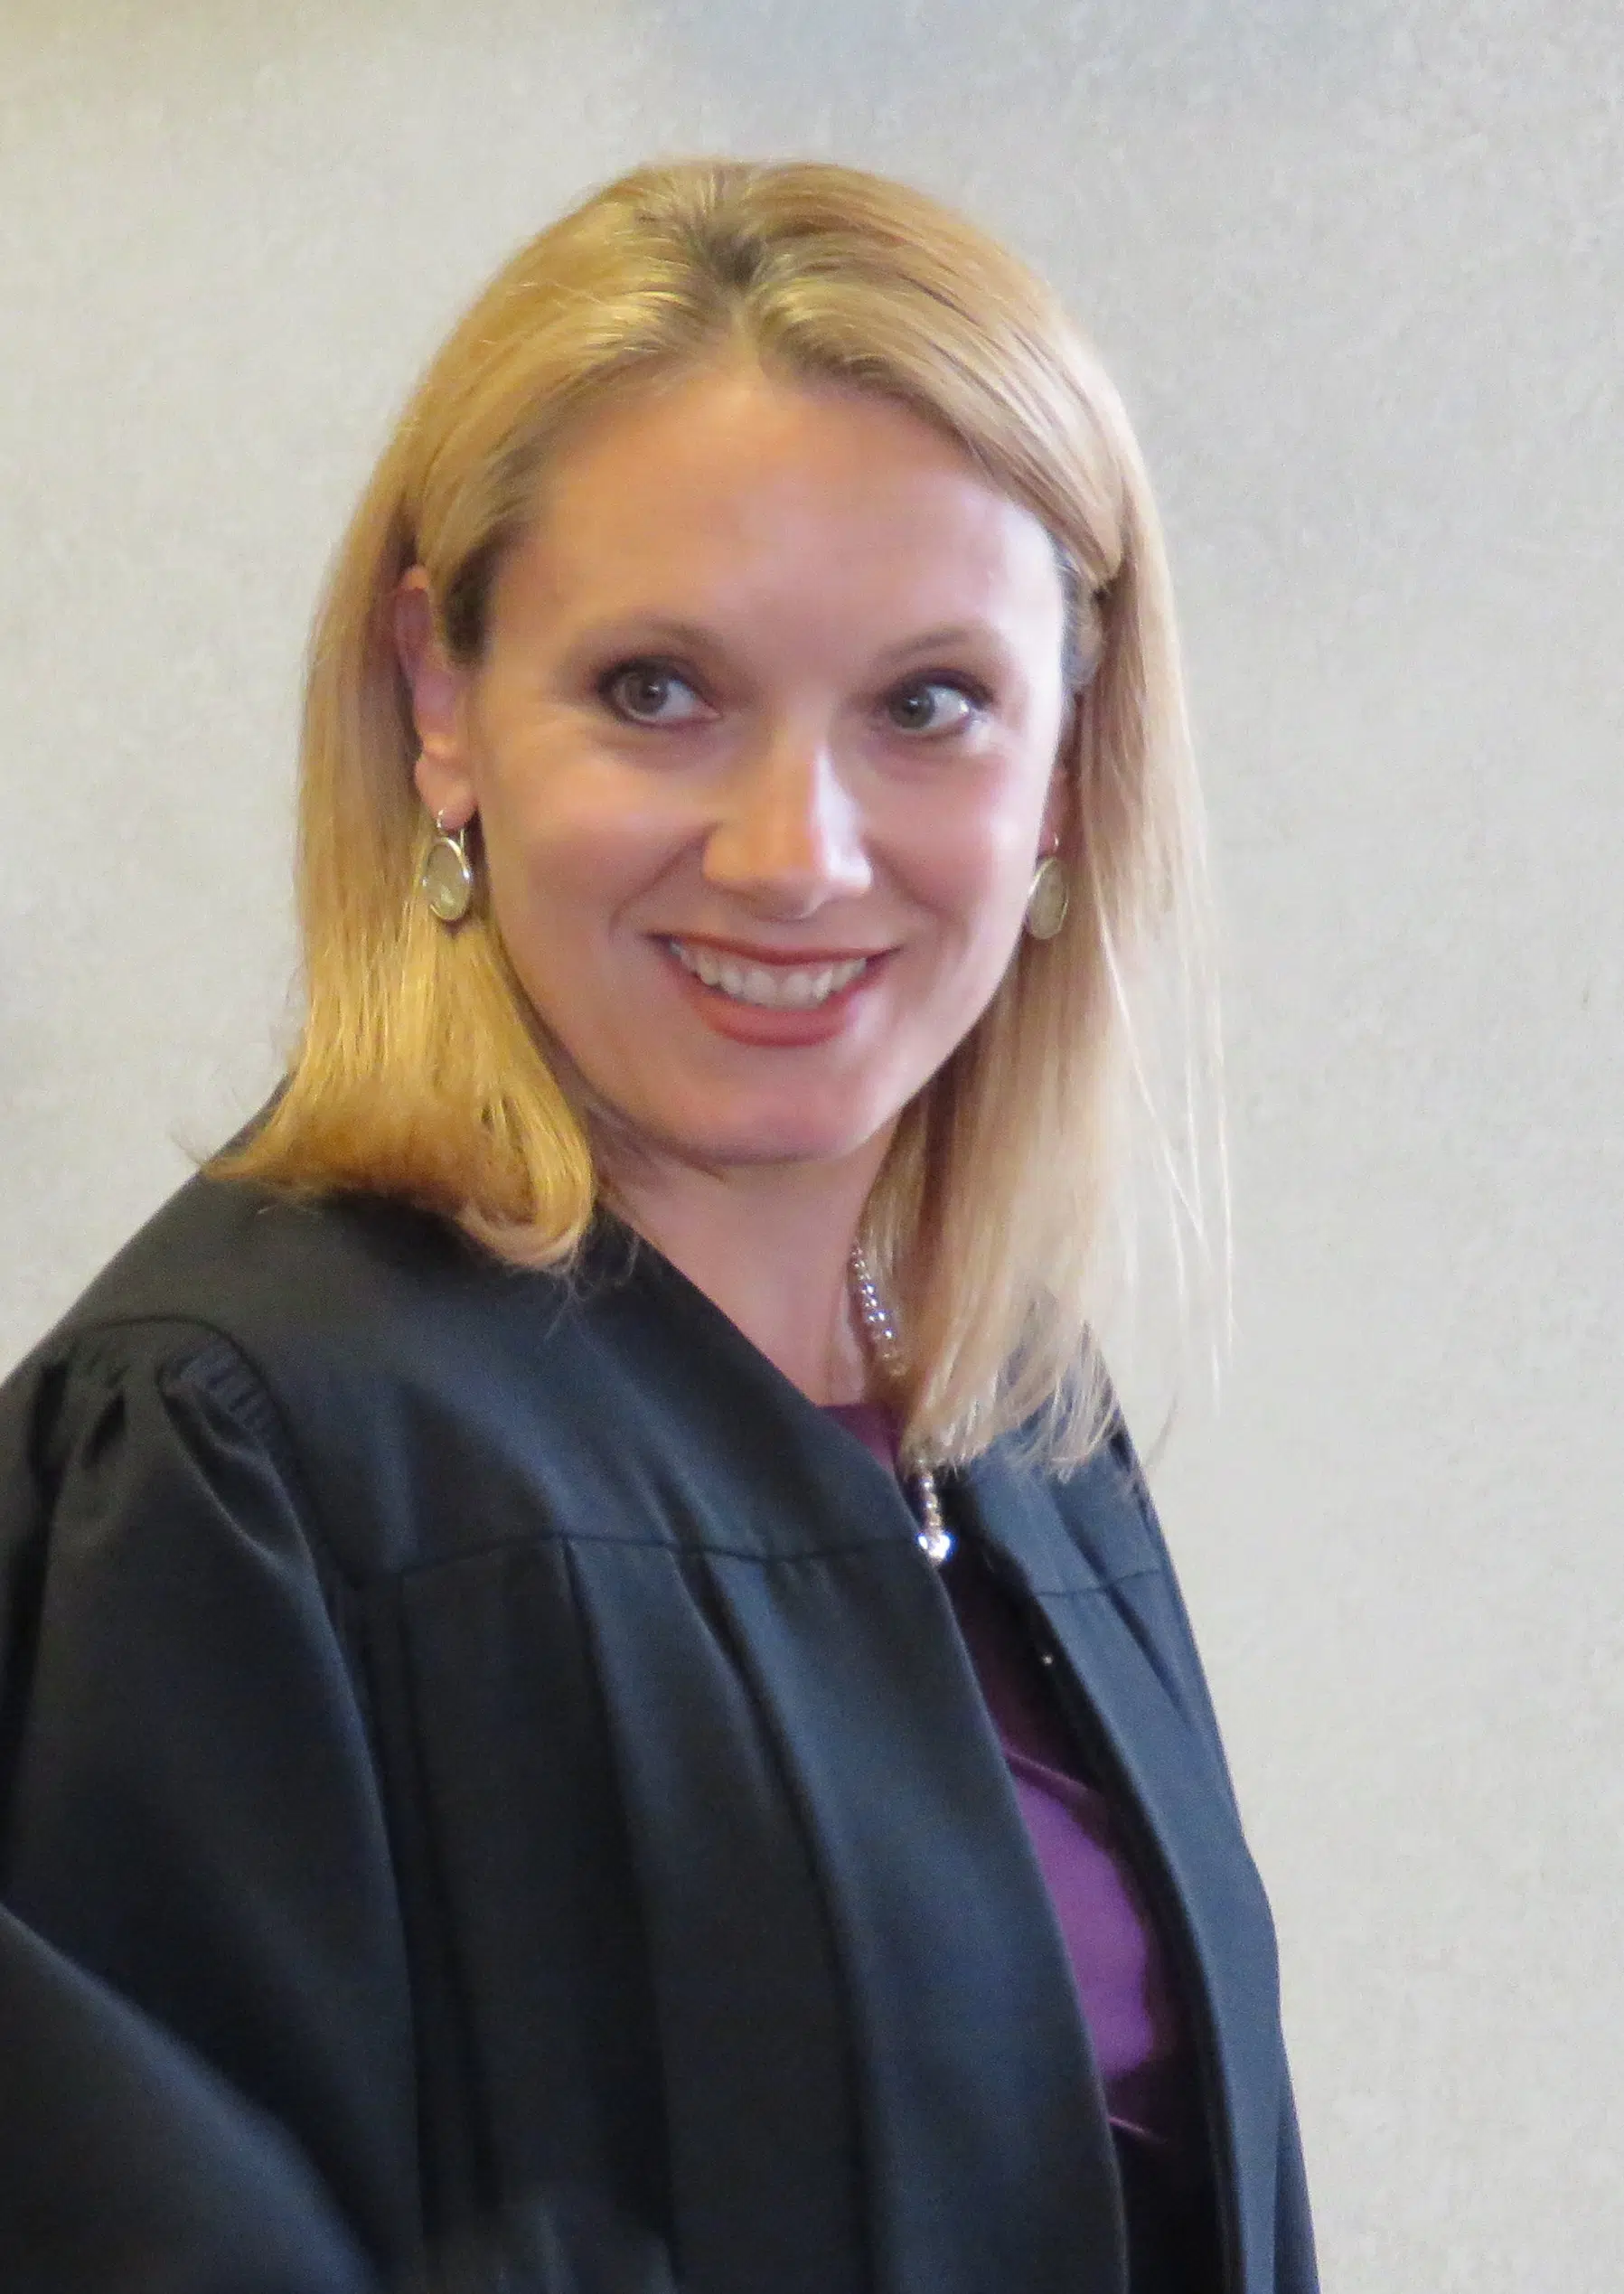 Jerilyn Dietz Sworn In as Manitowoc County Circuit Court Judge